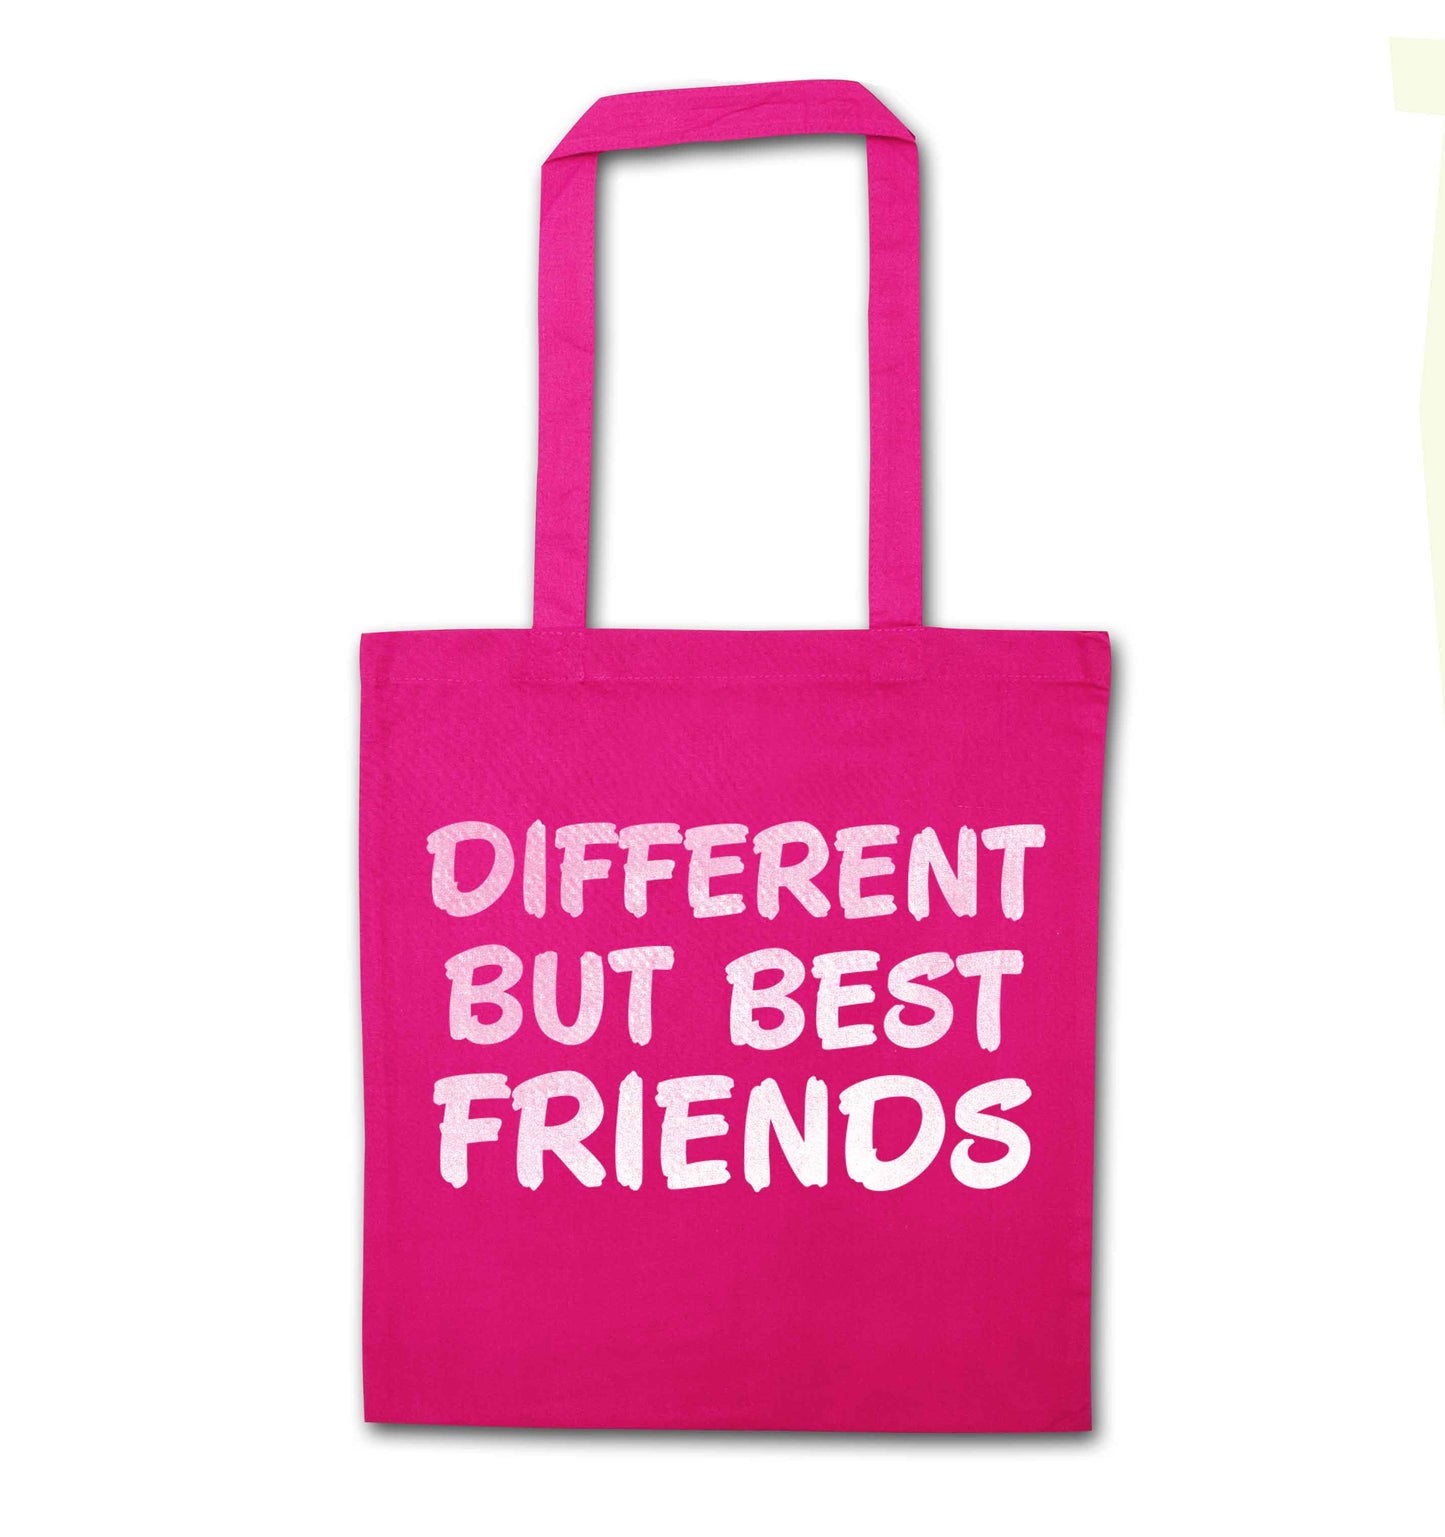 Different but best friends pink tote bag